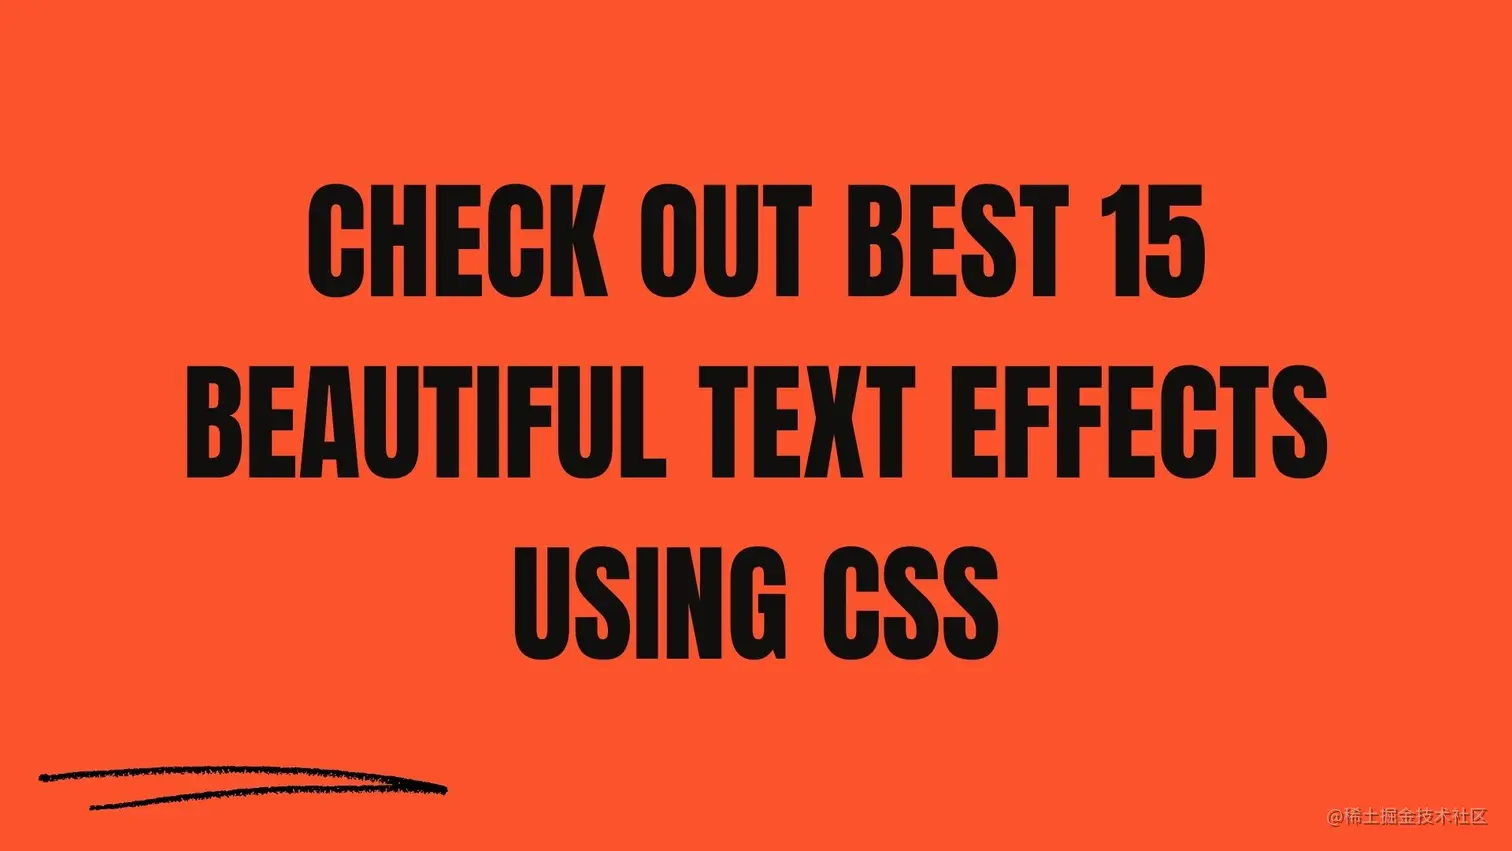 check out best 15 beautiful text effects using CSS.jpg